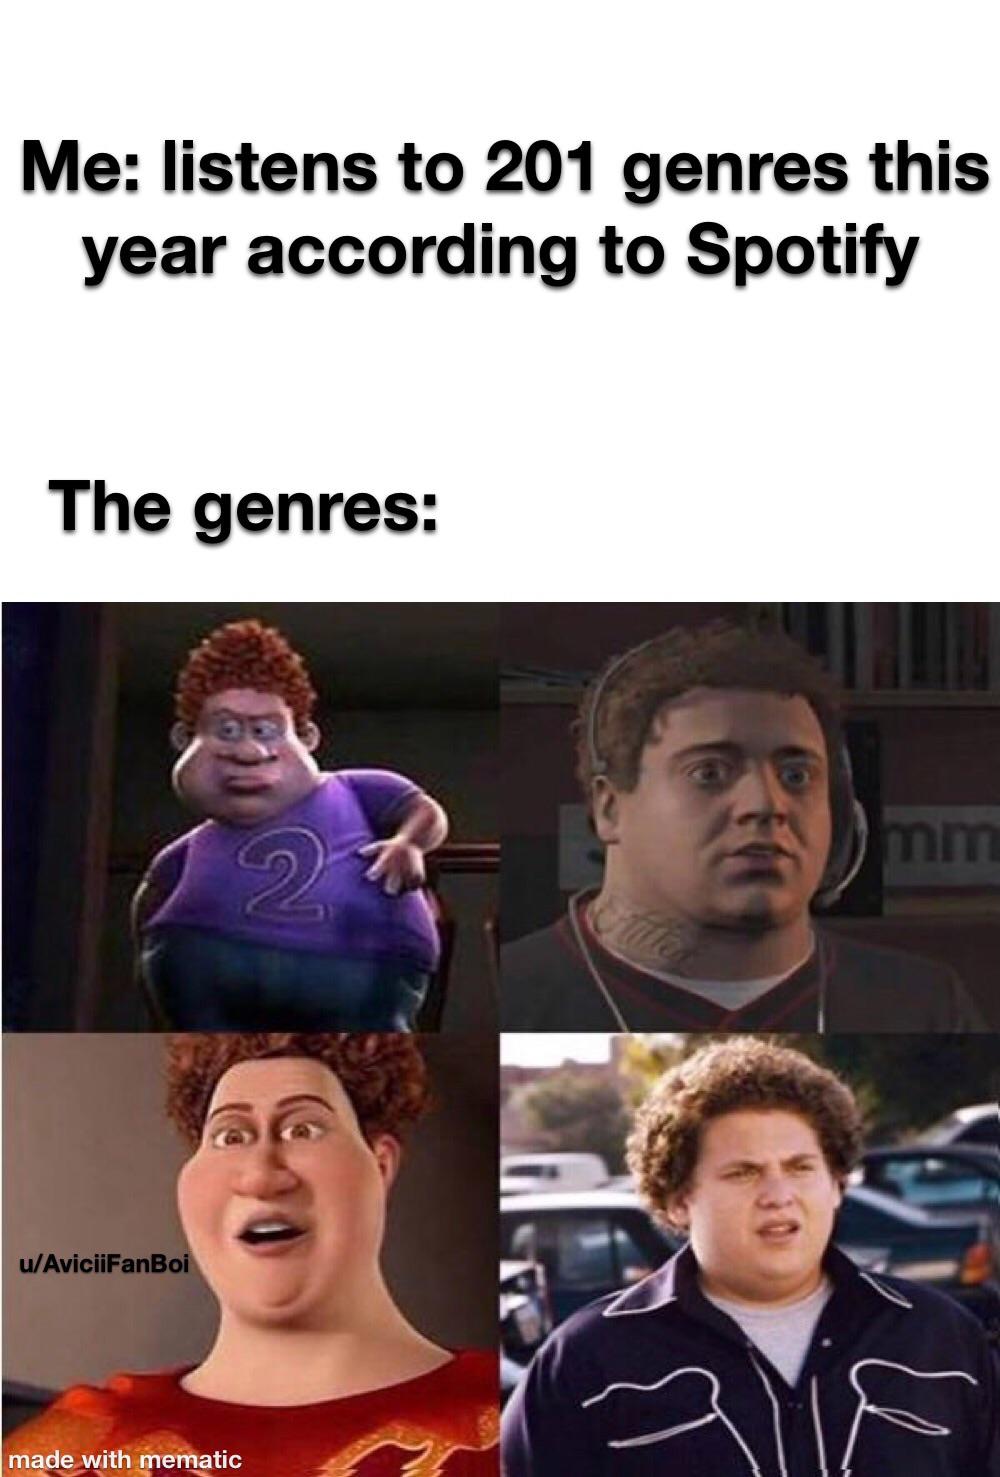 awful memes - Me listens to 201 genres this year according to Spotify The genres 2. uAviciiFanBoi made with mematic